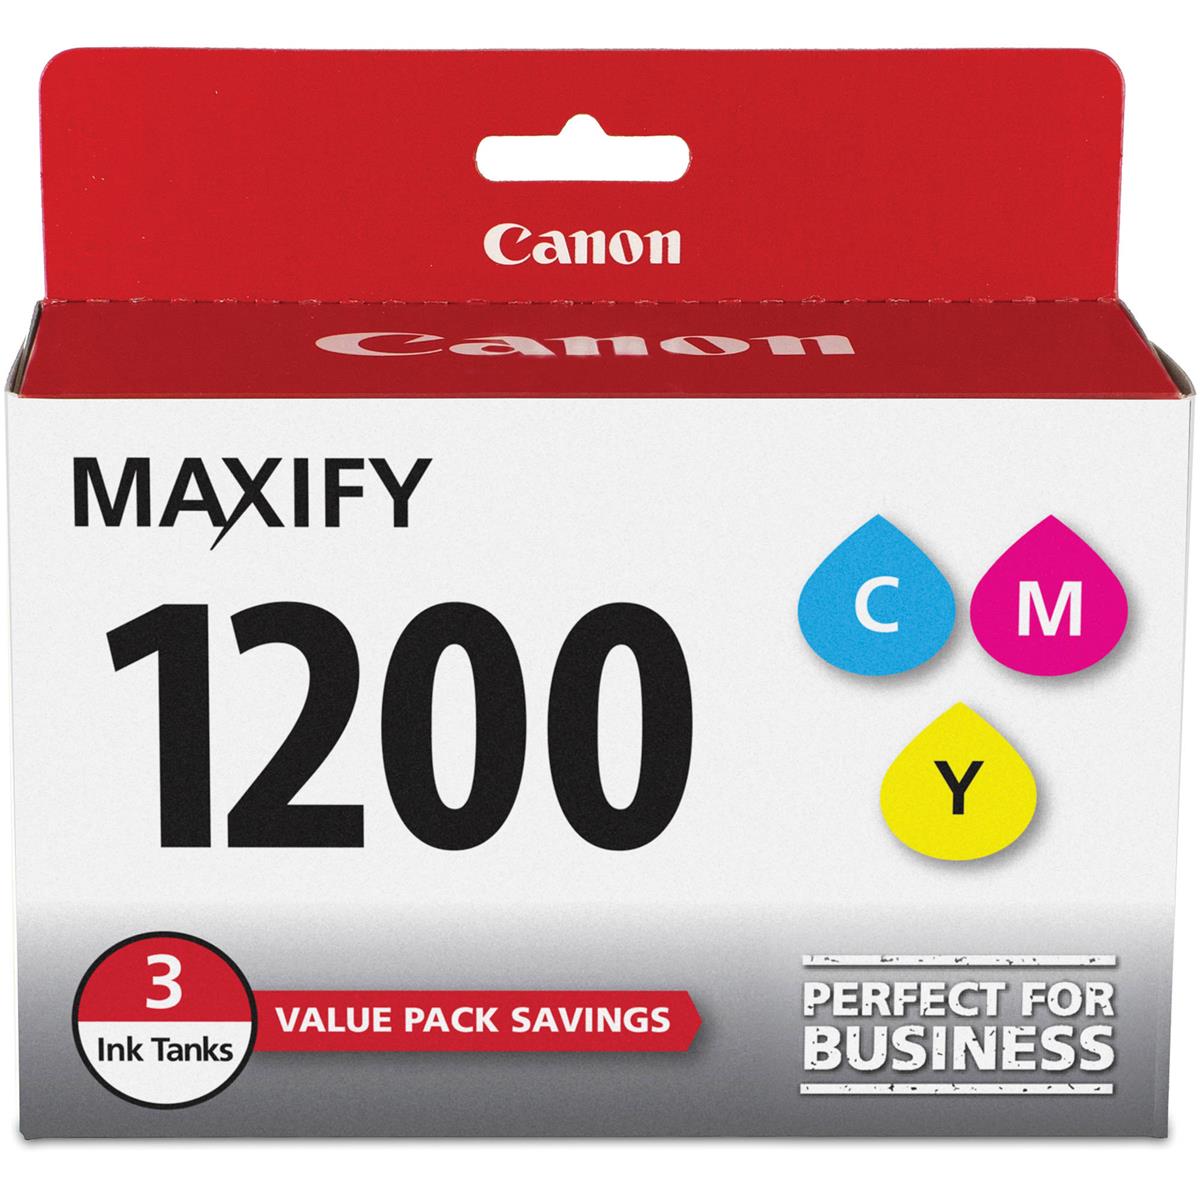 Image of Canon PGI-1200 Ink Cartridges for MAXIFY MB Series Printers